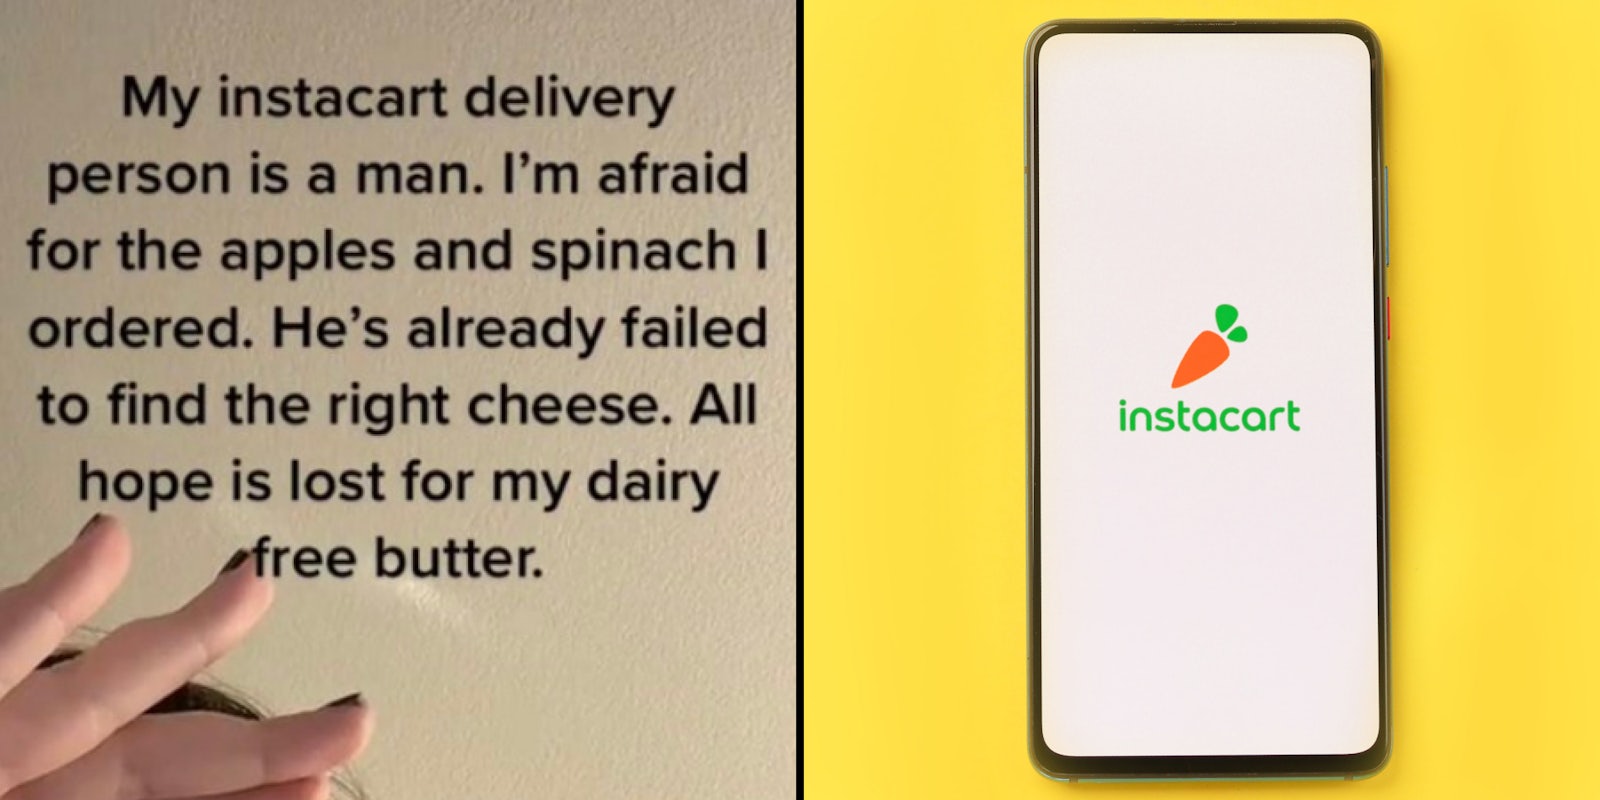 tiktok woman hand up caption 'My instacart delivery person is a man. I'm afraid for the apples and spinach I ordered. He's already failed to find the right cheese. All hope is lost for my dairy free butter.' (l) Instacart app logo on black phone on yellow background (r)